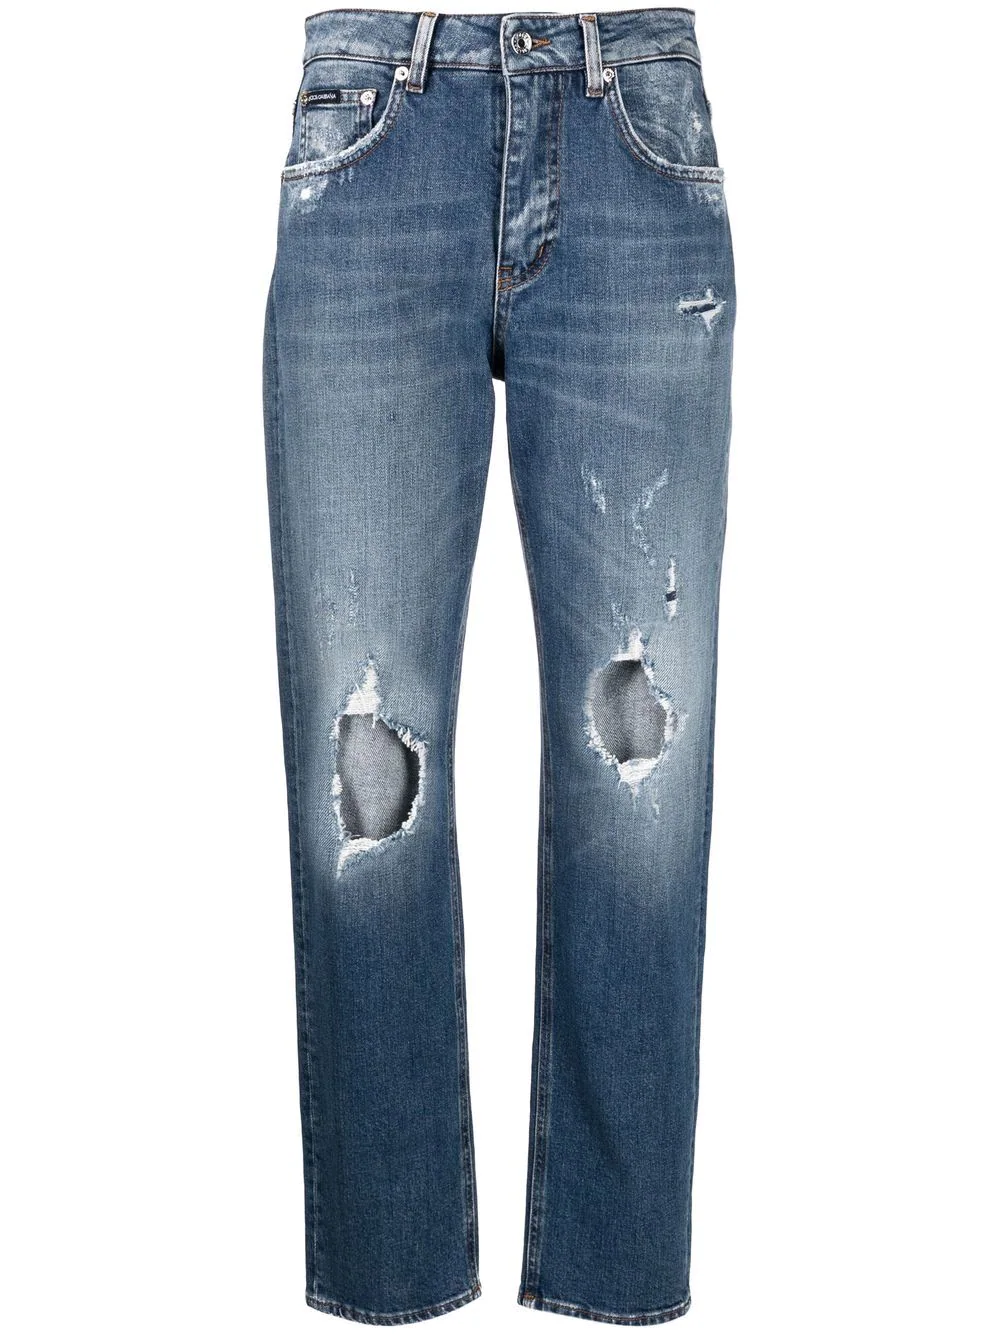 DOLCE & GABBANA DISTRESSED EFFECT JEANS